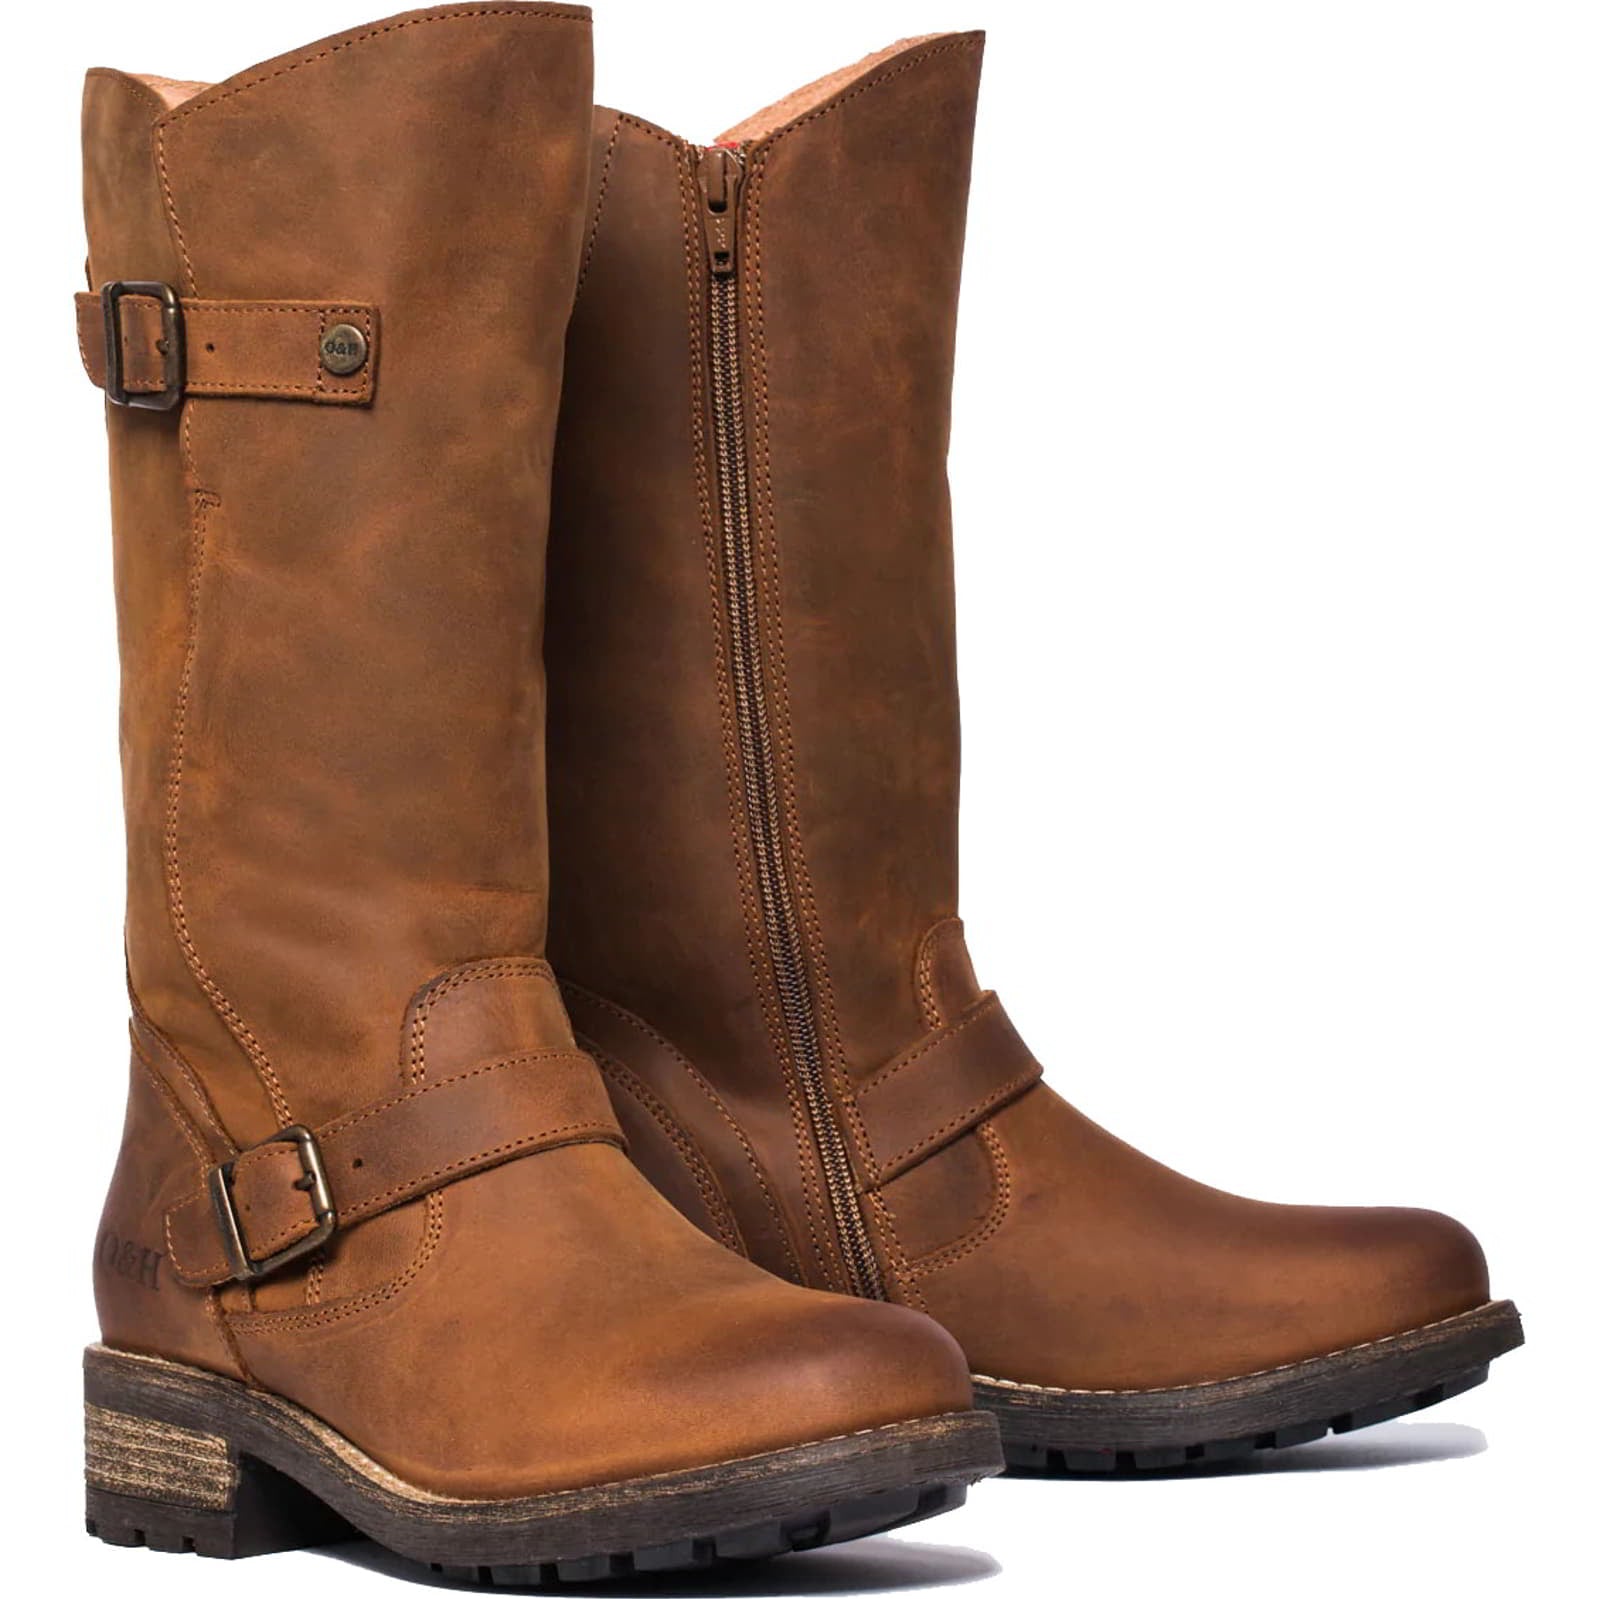 Crest Womens Tall Leather Boots - Cognac